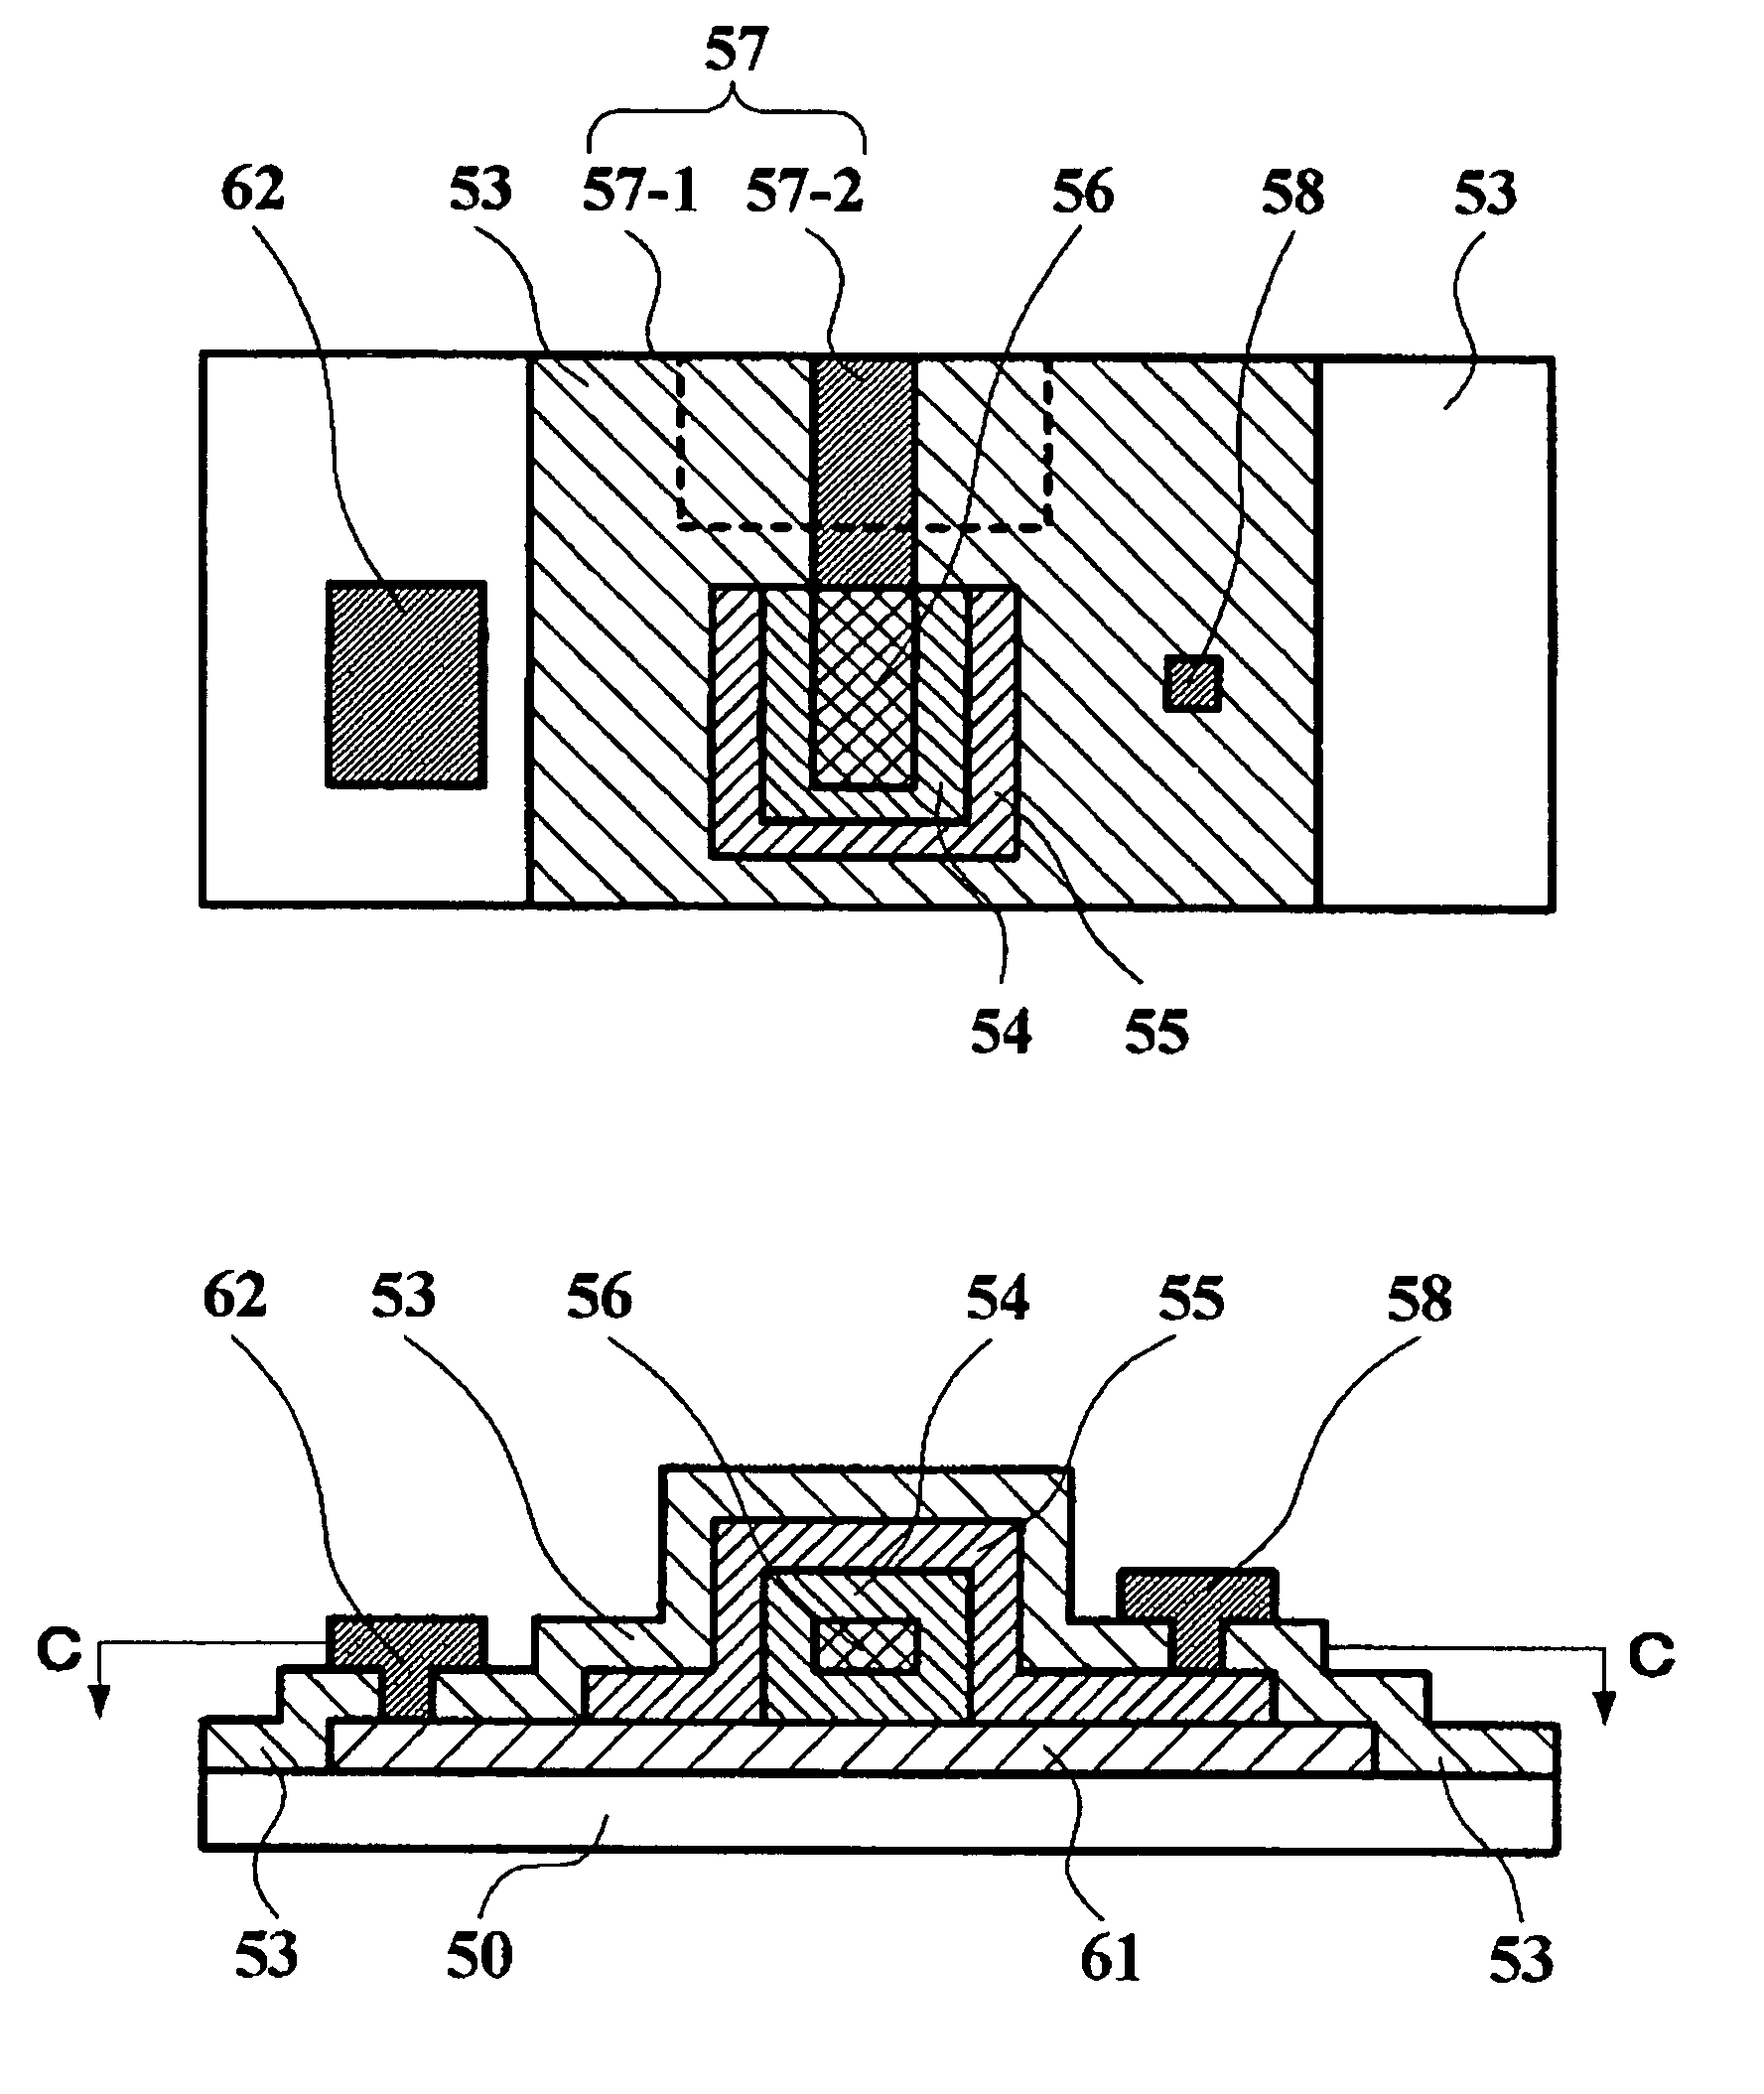 Spin injection magnetization reversal element